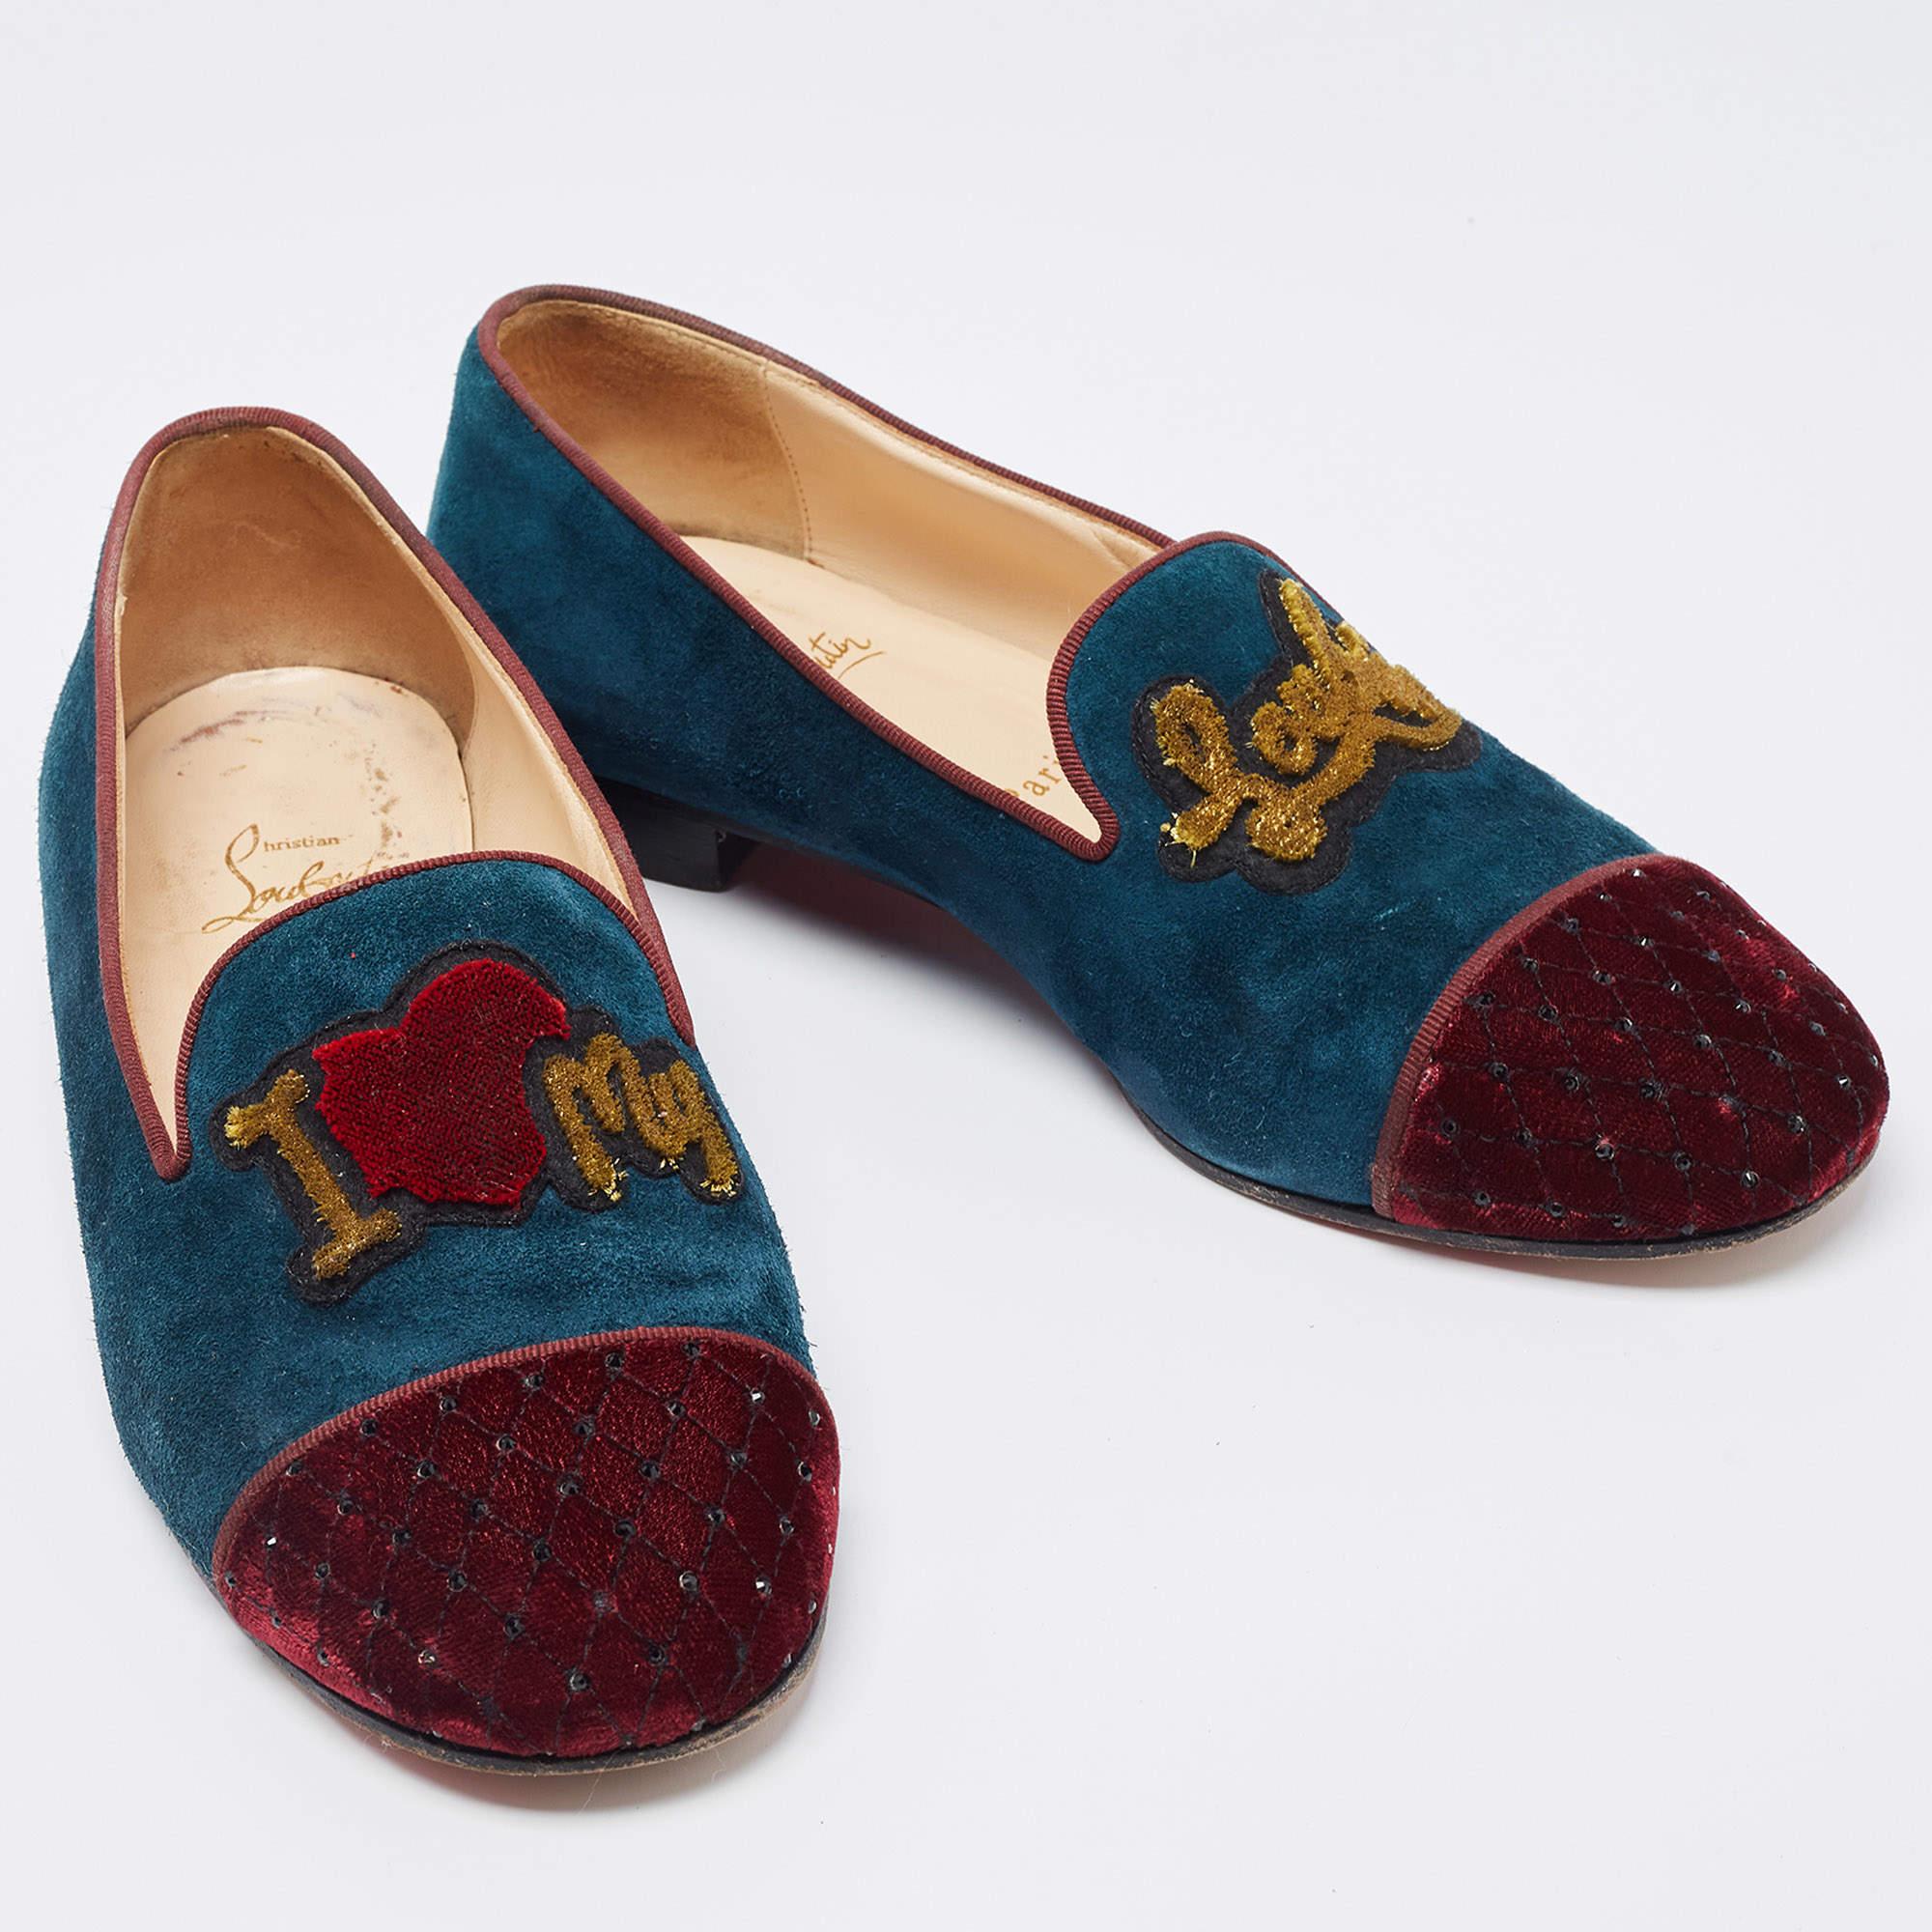 Women's Christian Louboutin Two Tone Suede And Velvet I Love My Loubies Smoking Slippers